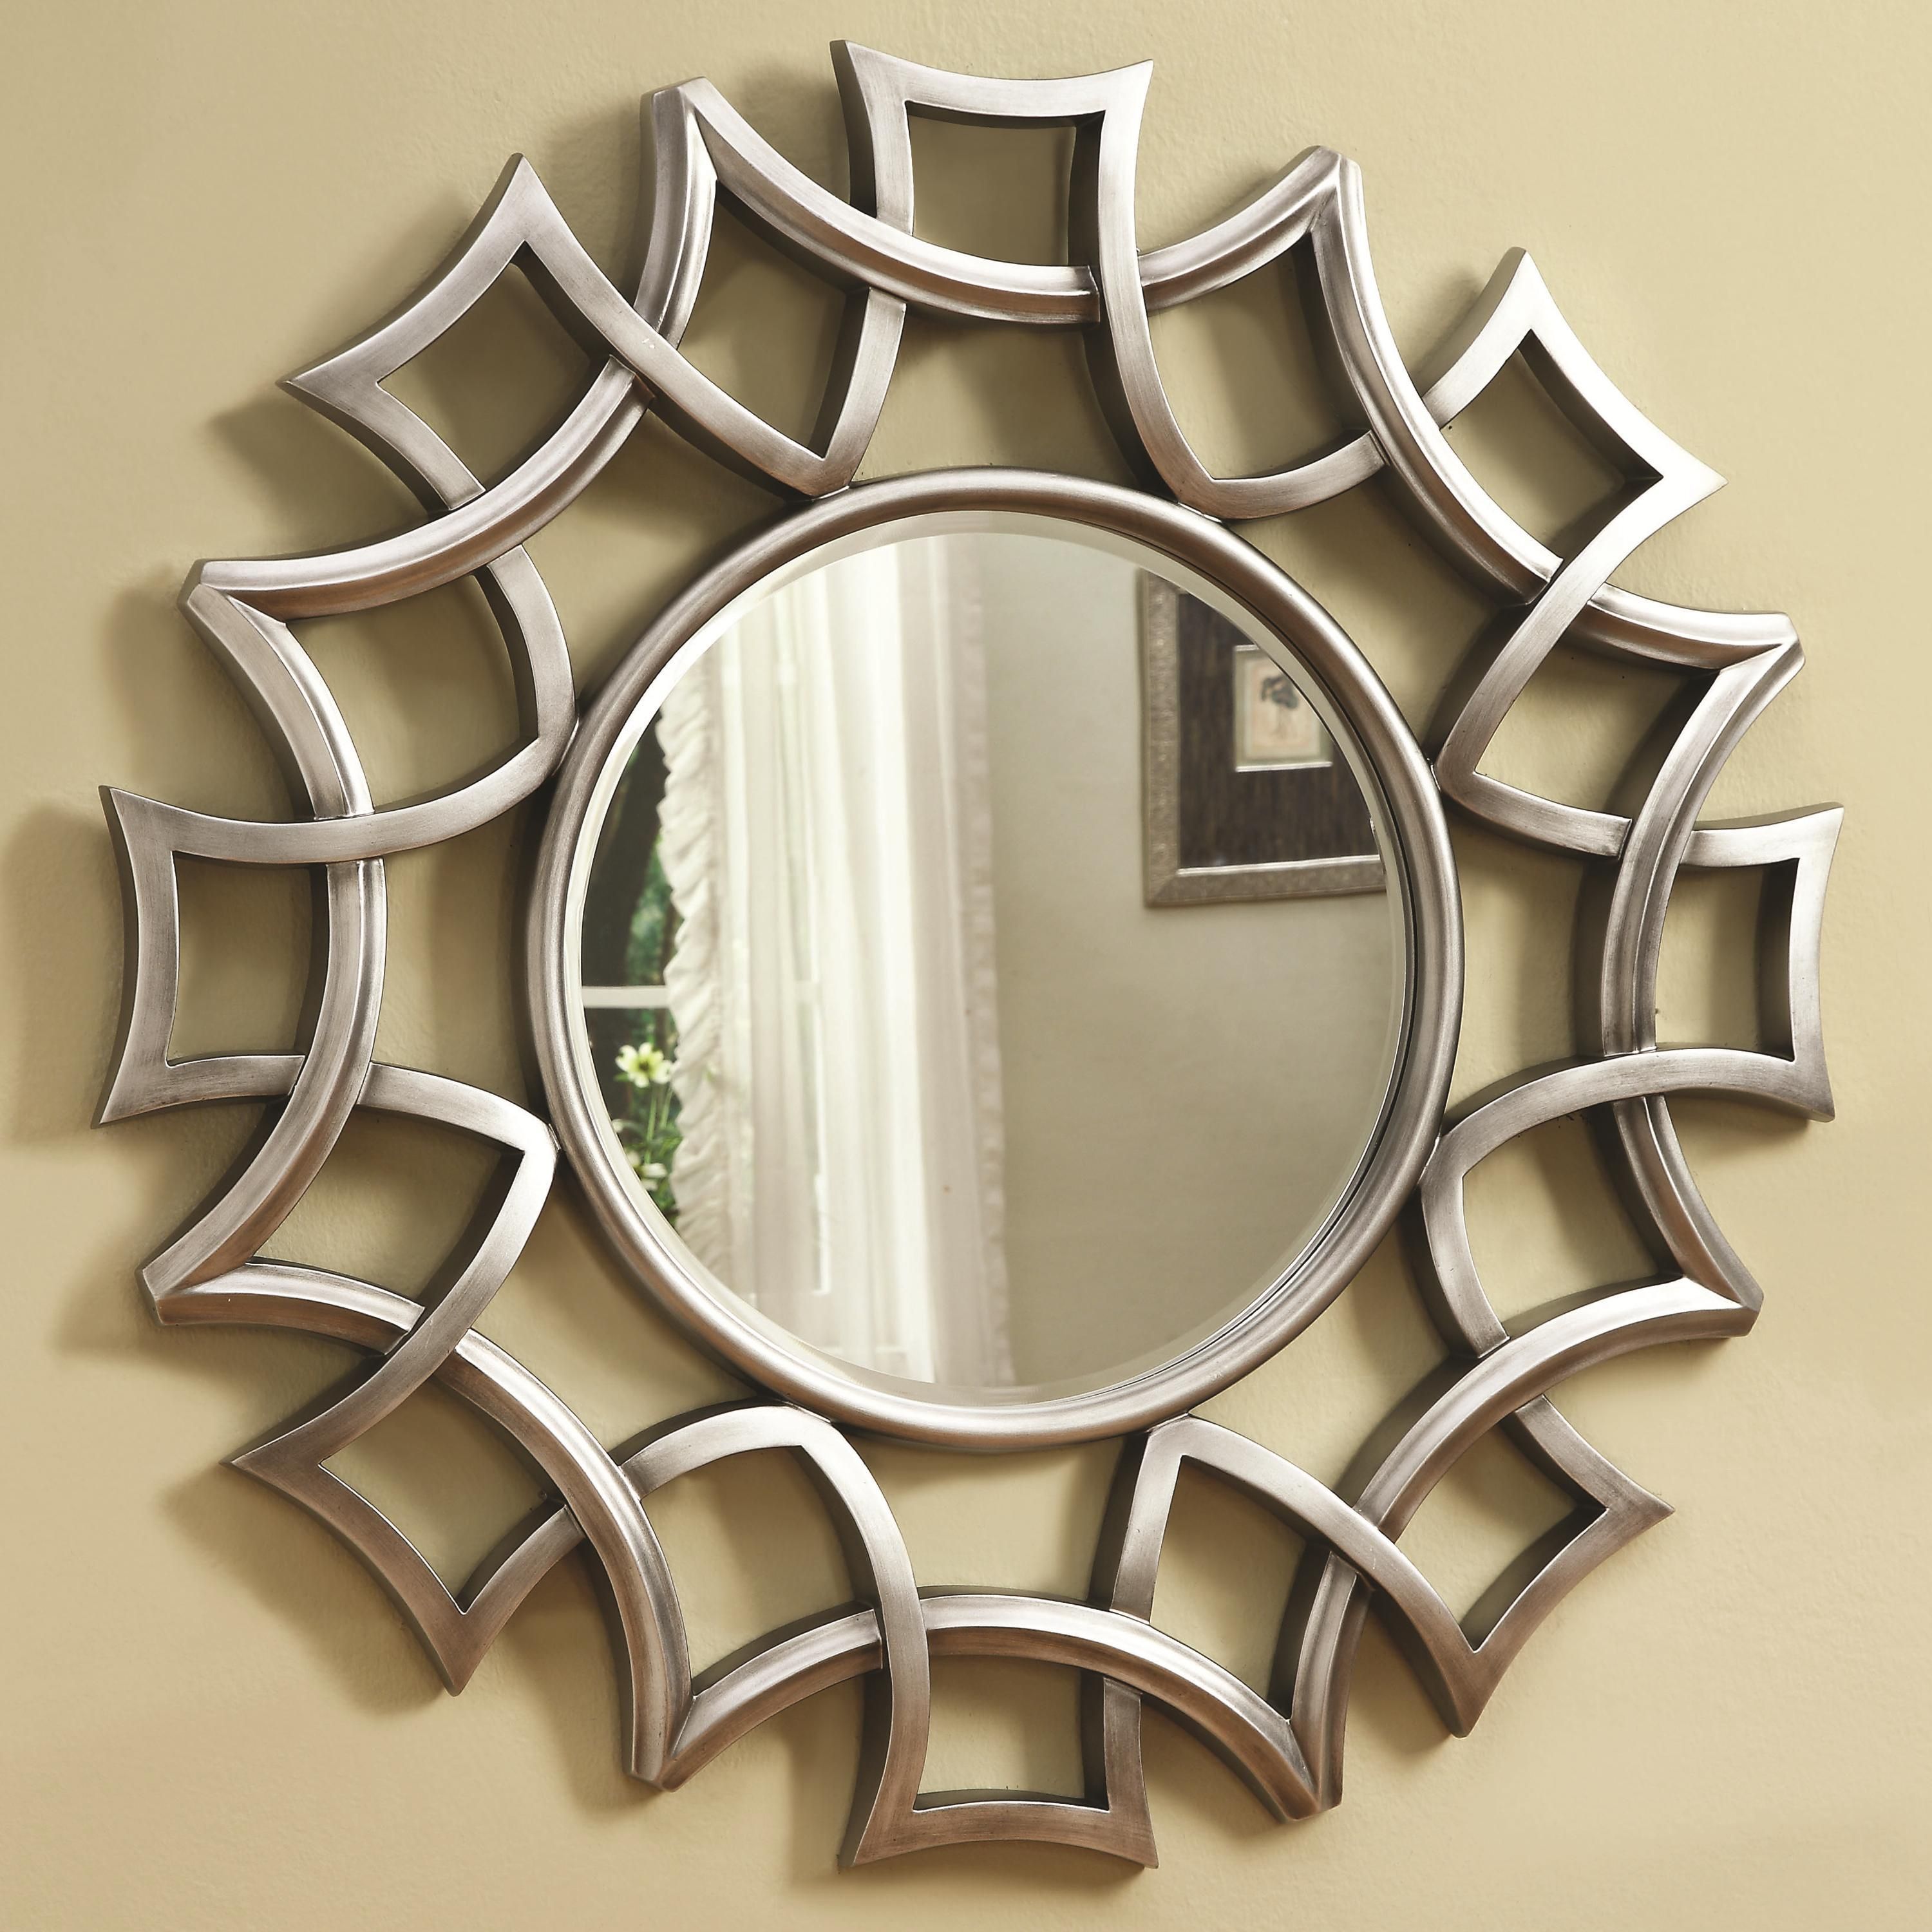 Coaster Accent Mirrors Starburst Mirror In Silver Finish Intended For Wood Accent Mirrors (View 20 of 20)